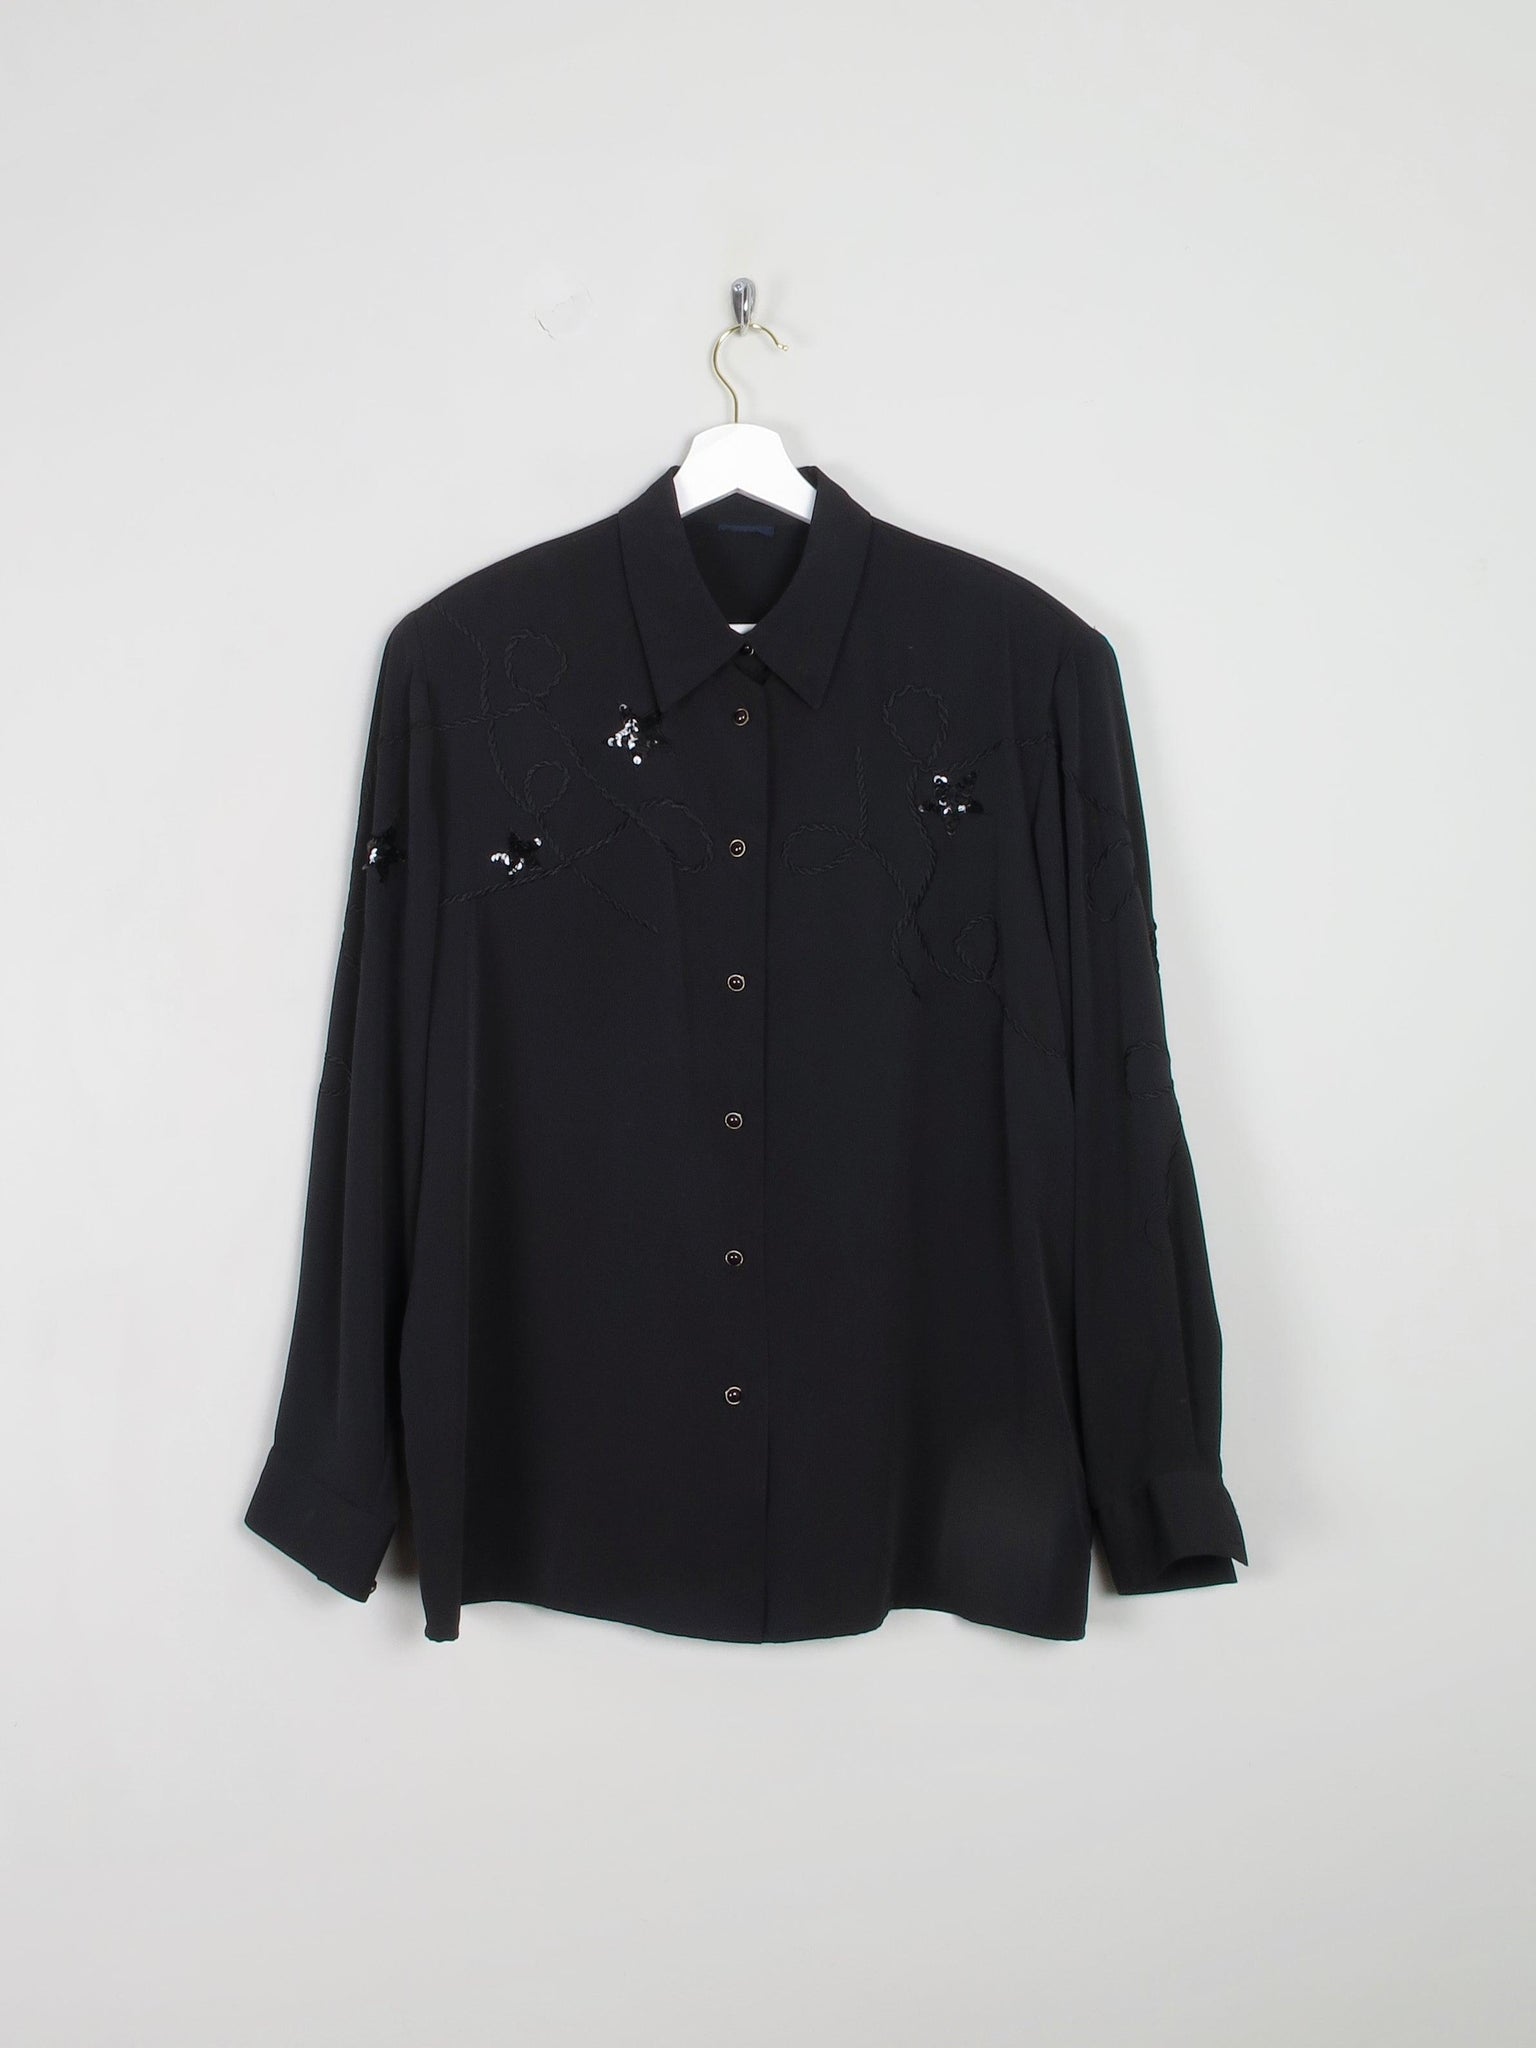 Vintage Black Sequin & Embroidered Vintage Blouse With Collar L/XL - The Harlequin